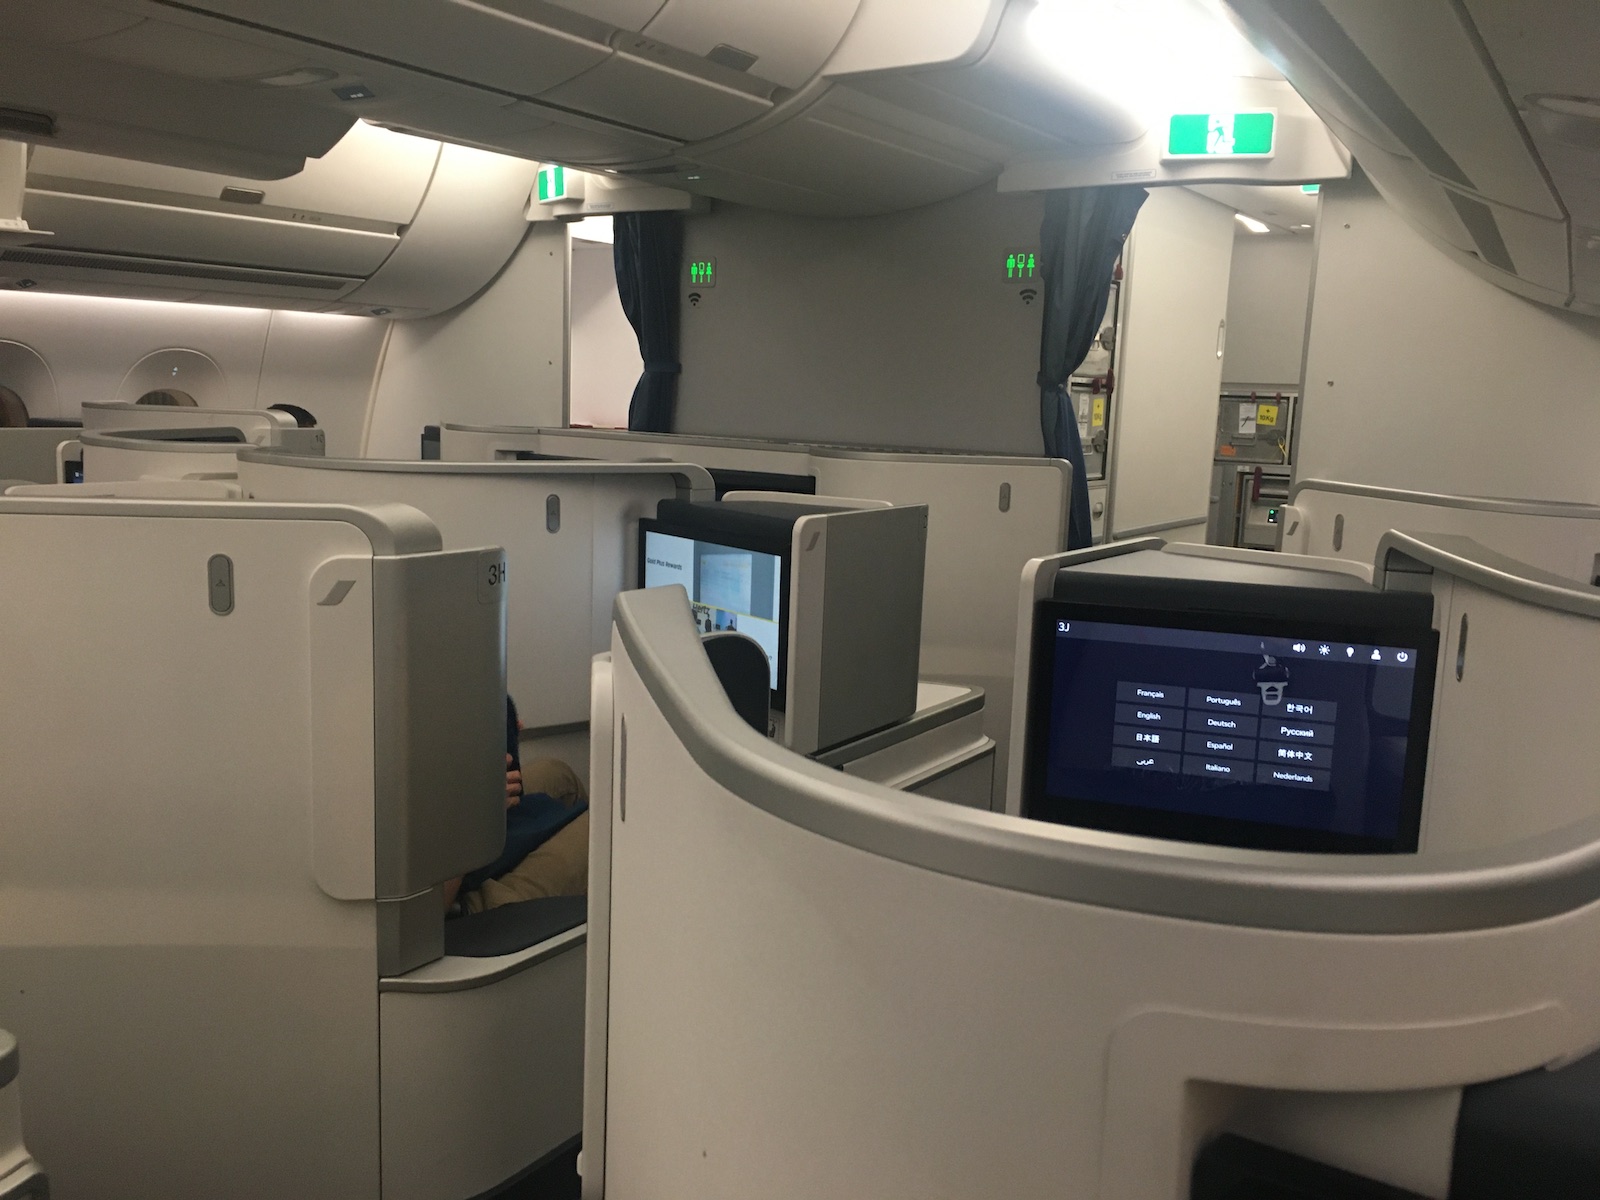 Air France A350 business class cabin layout